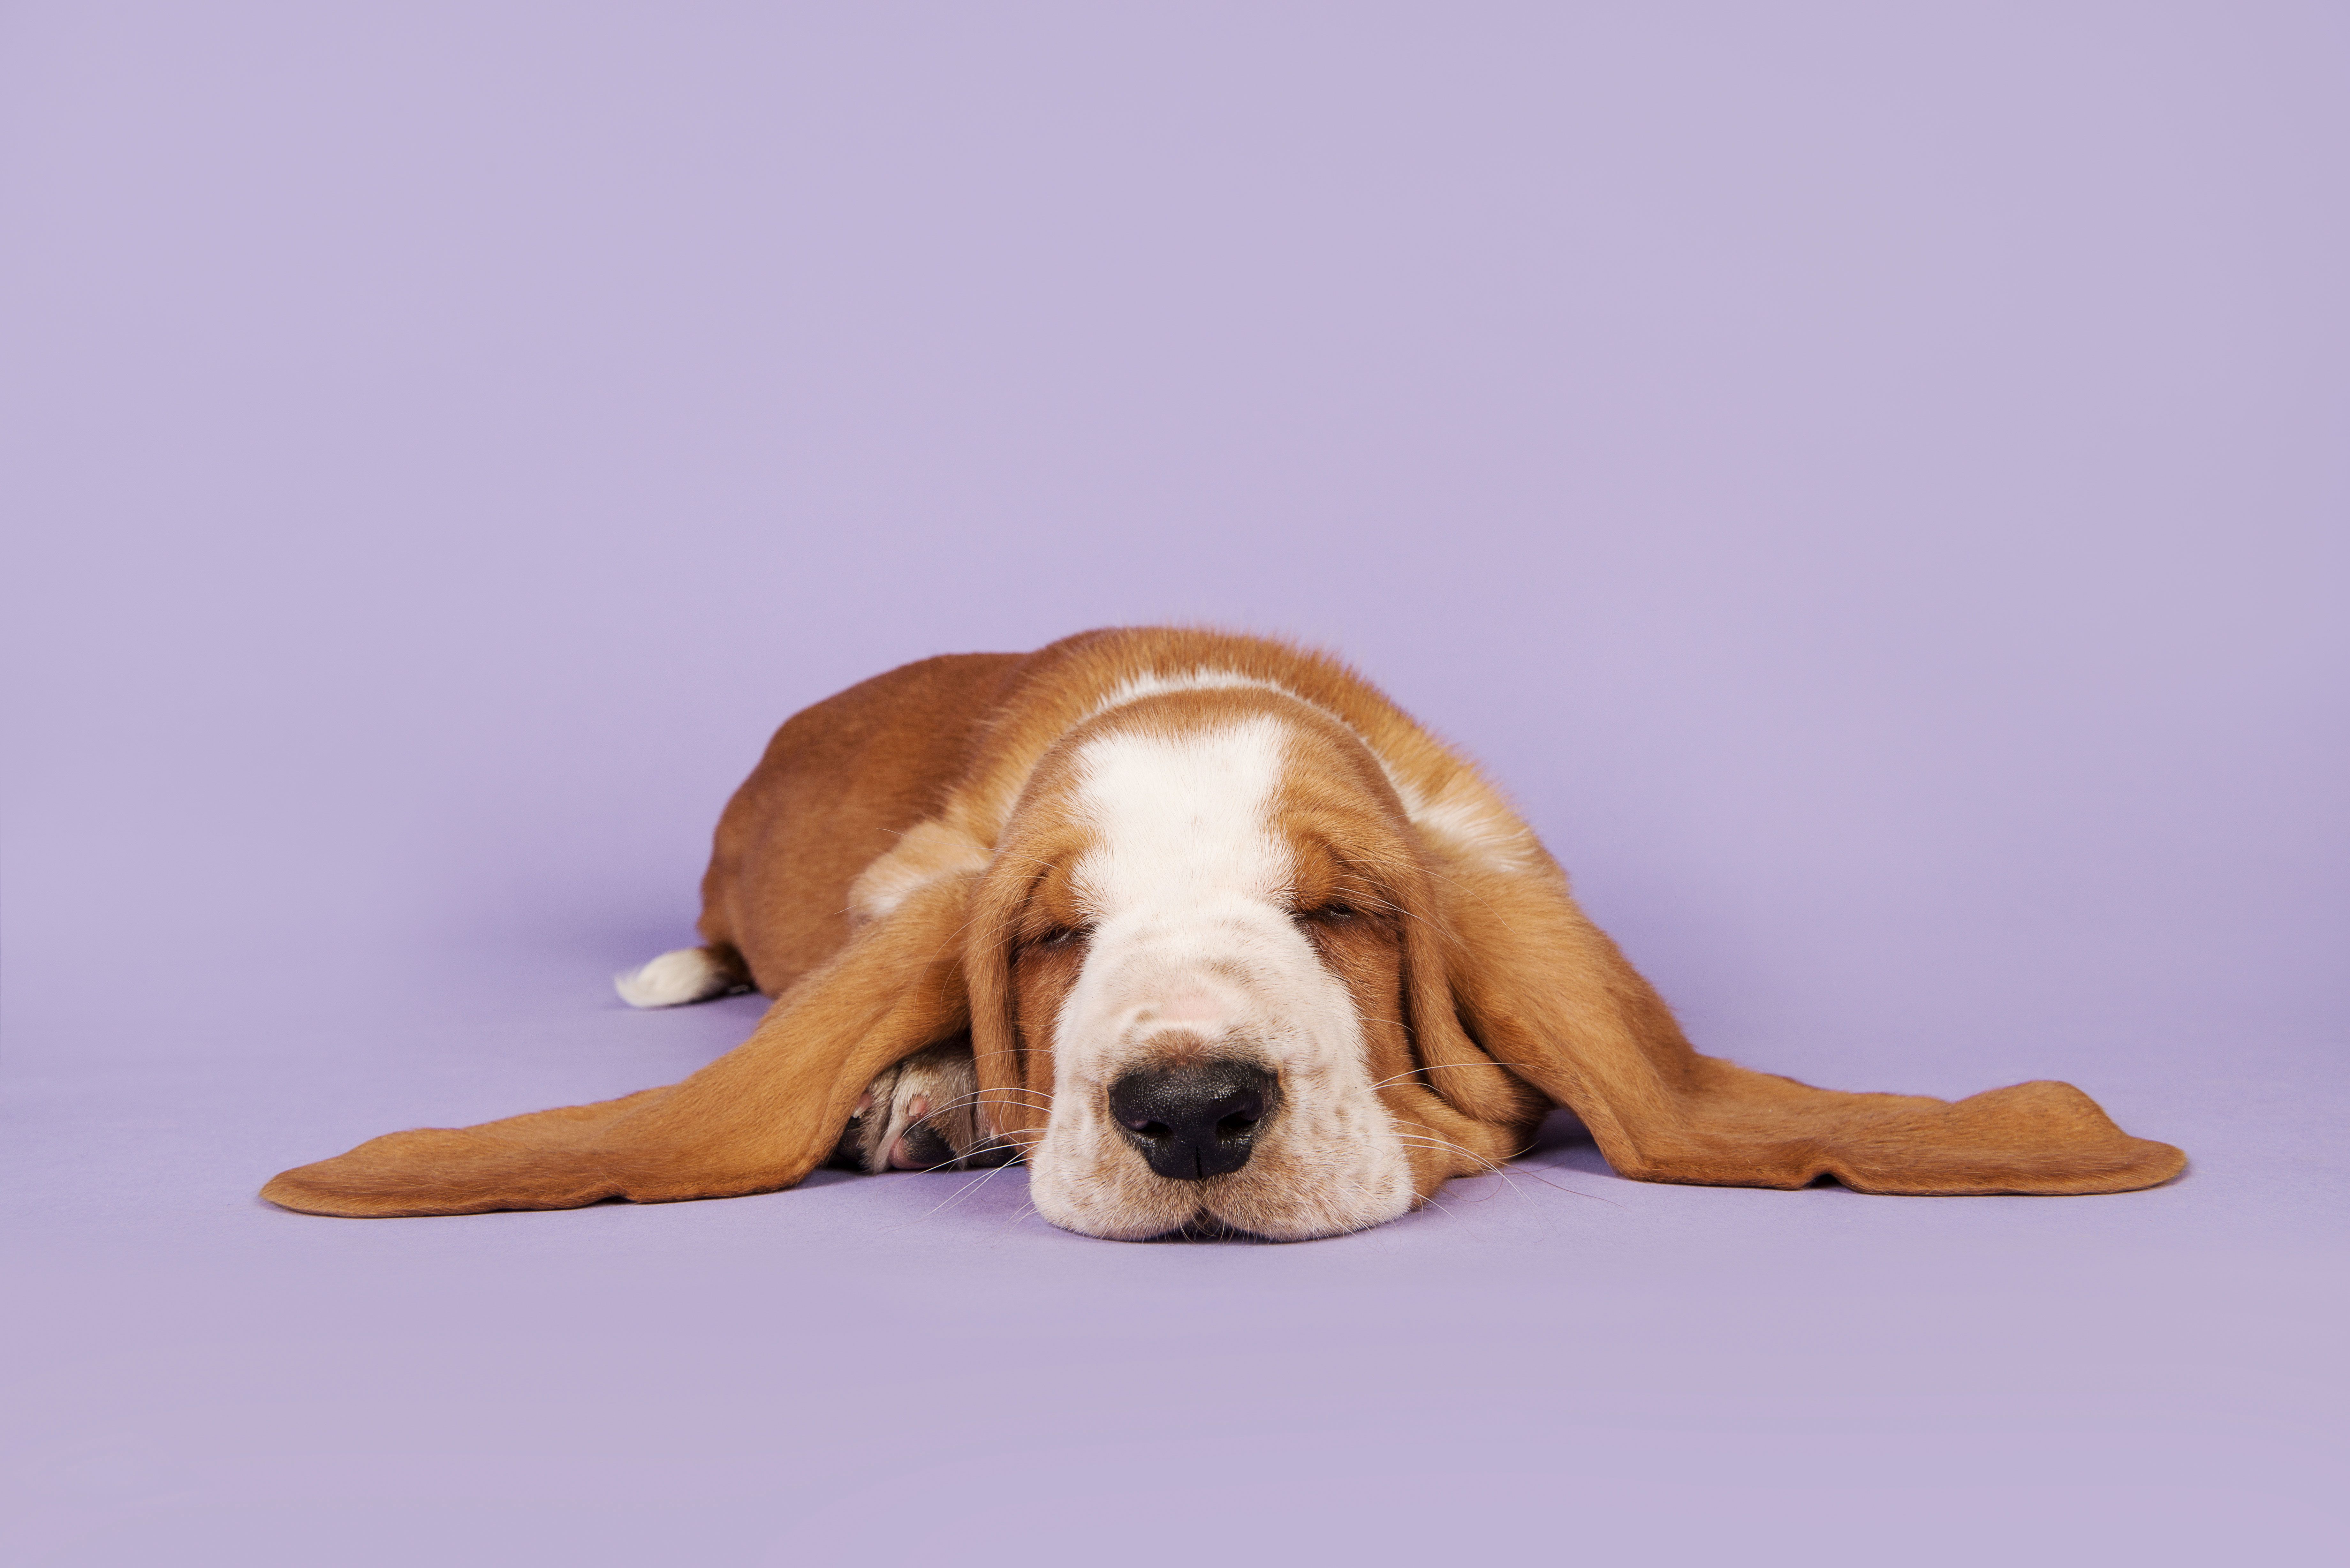 How To Interpret Dreams About Dogs